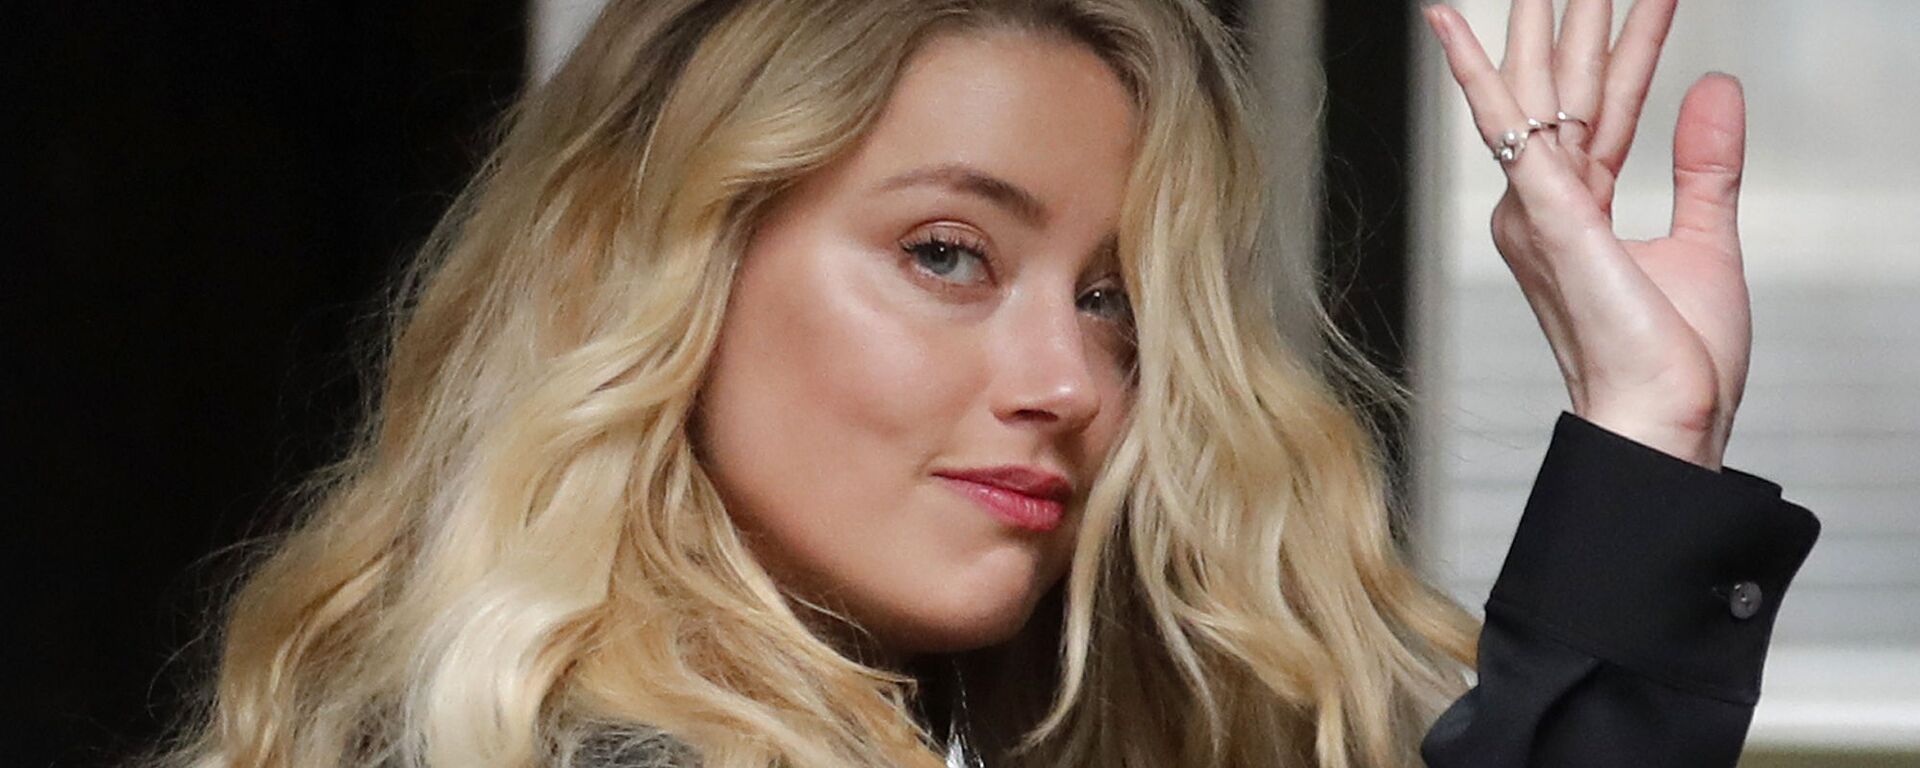 US Actress Amber Heard, former wife of actor Johnny Depp, arrives at the High Court in London, Tuesday, July 28, 2020.  - Sputnik International, 1920, 04.11.2022